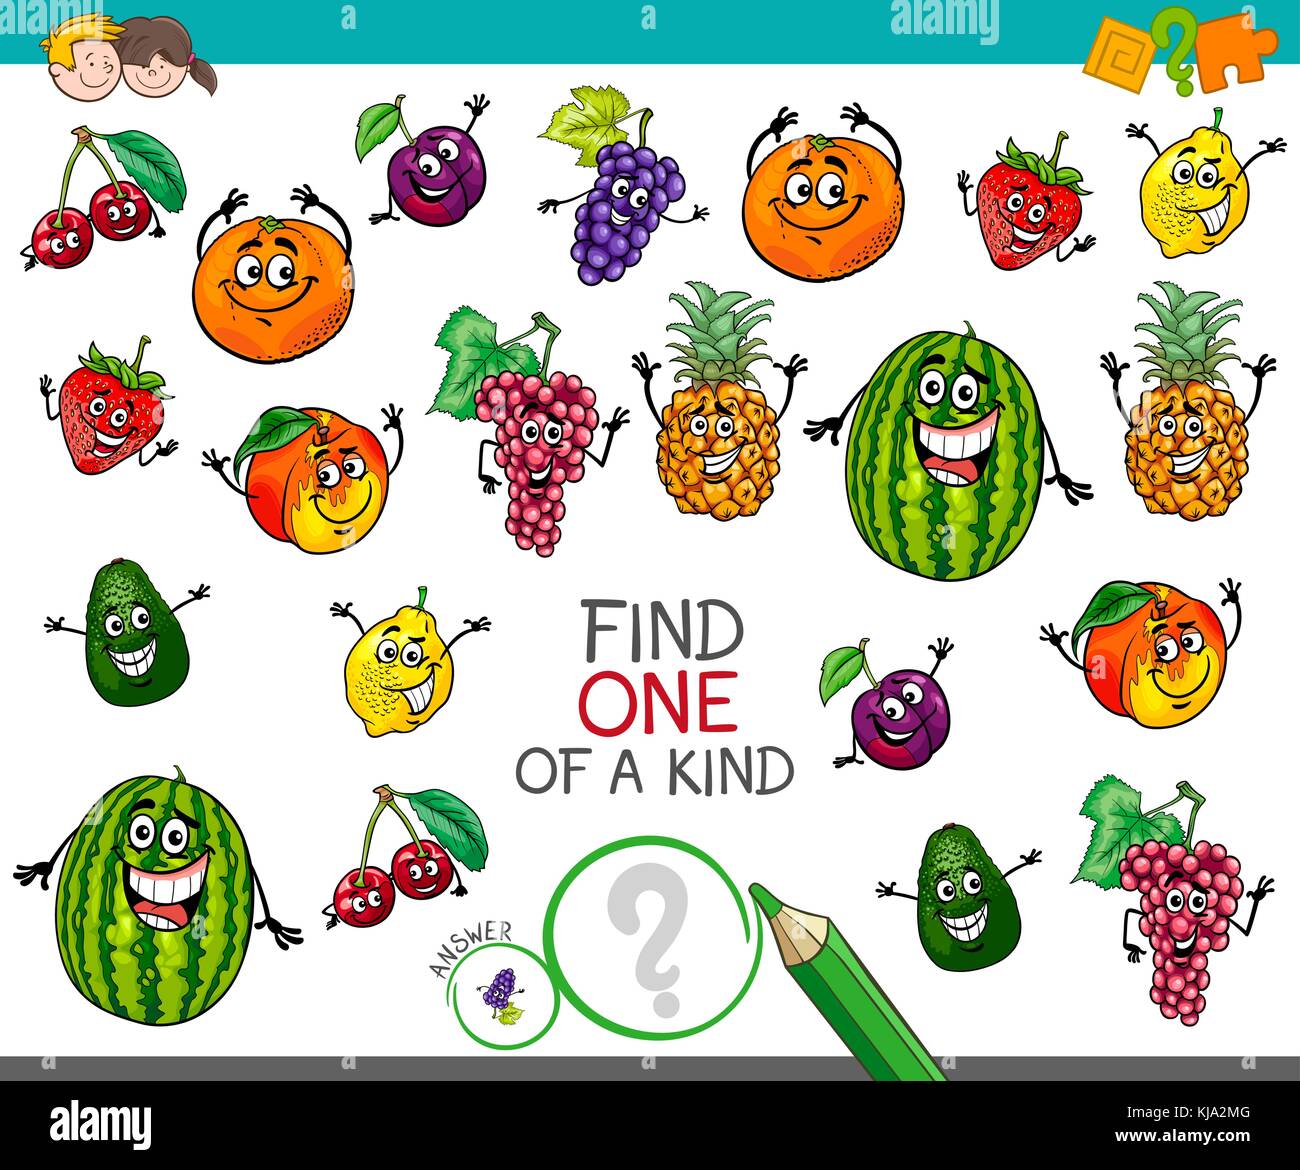 Cartoon Illustration of Find One of a Kind Educational Activity Game for Children with Fruits Funny Characters Stock Vector